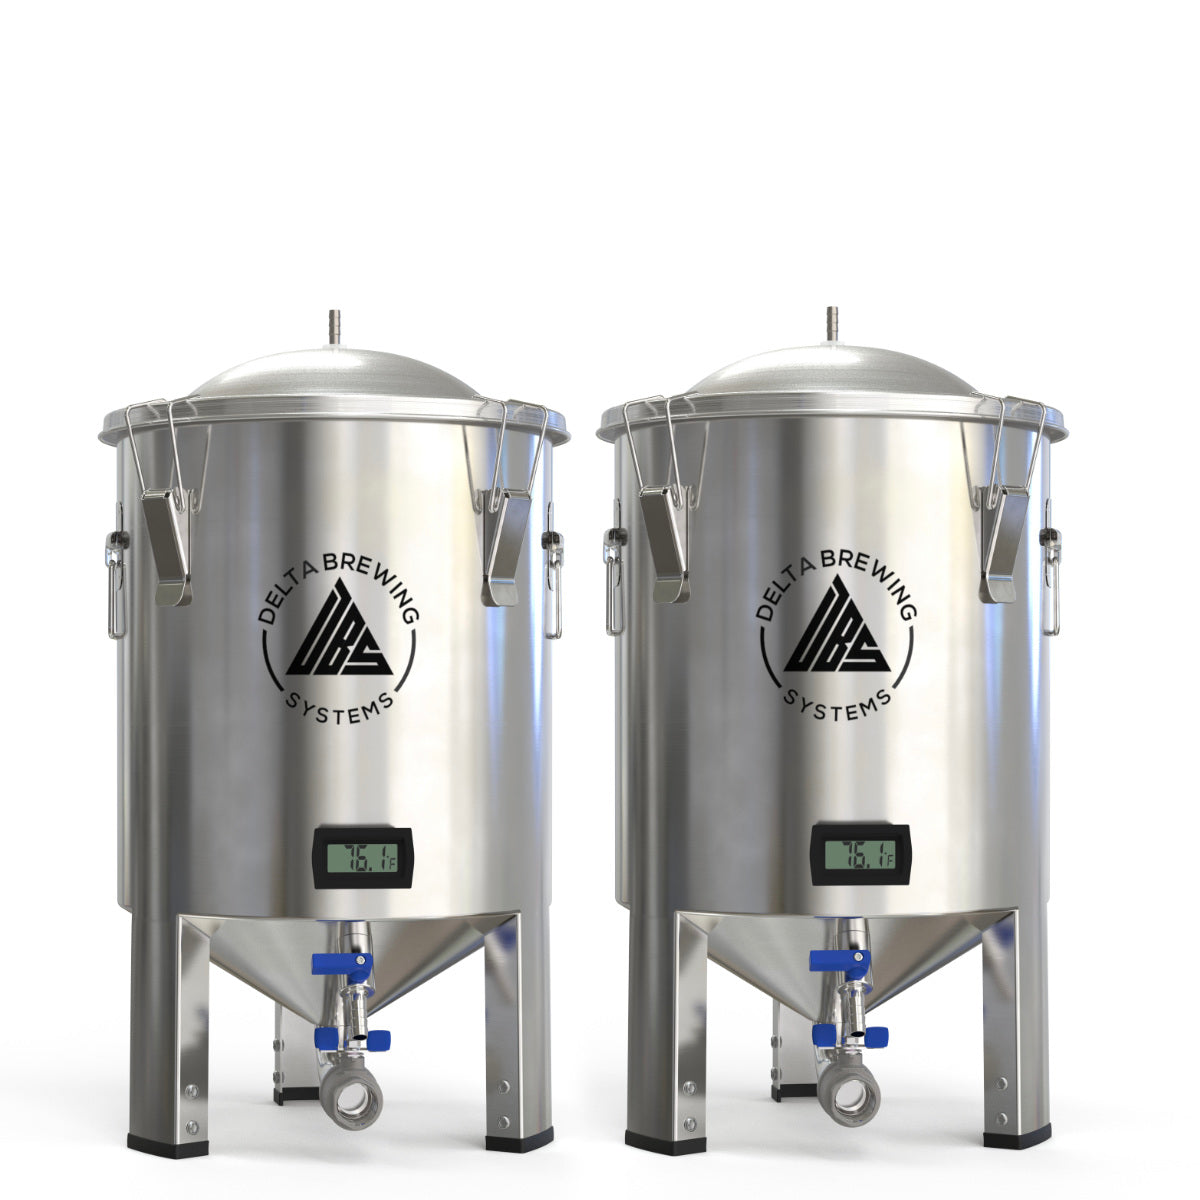 8 Gallon Conical Fermenter, Home Brewing, Beer, Stainless Steel